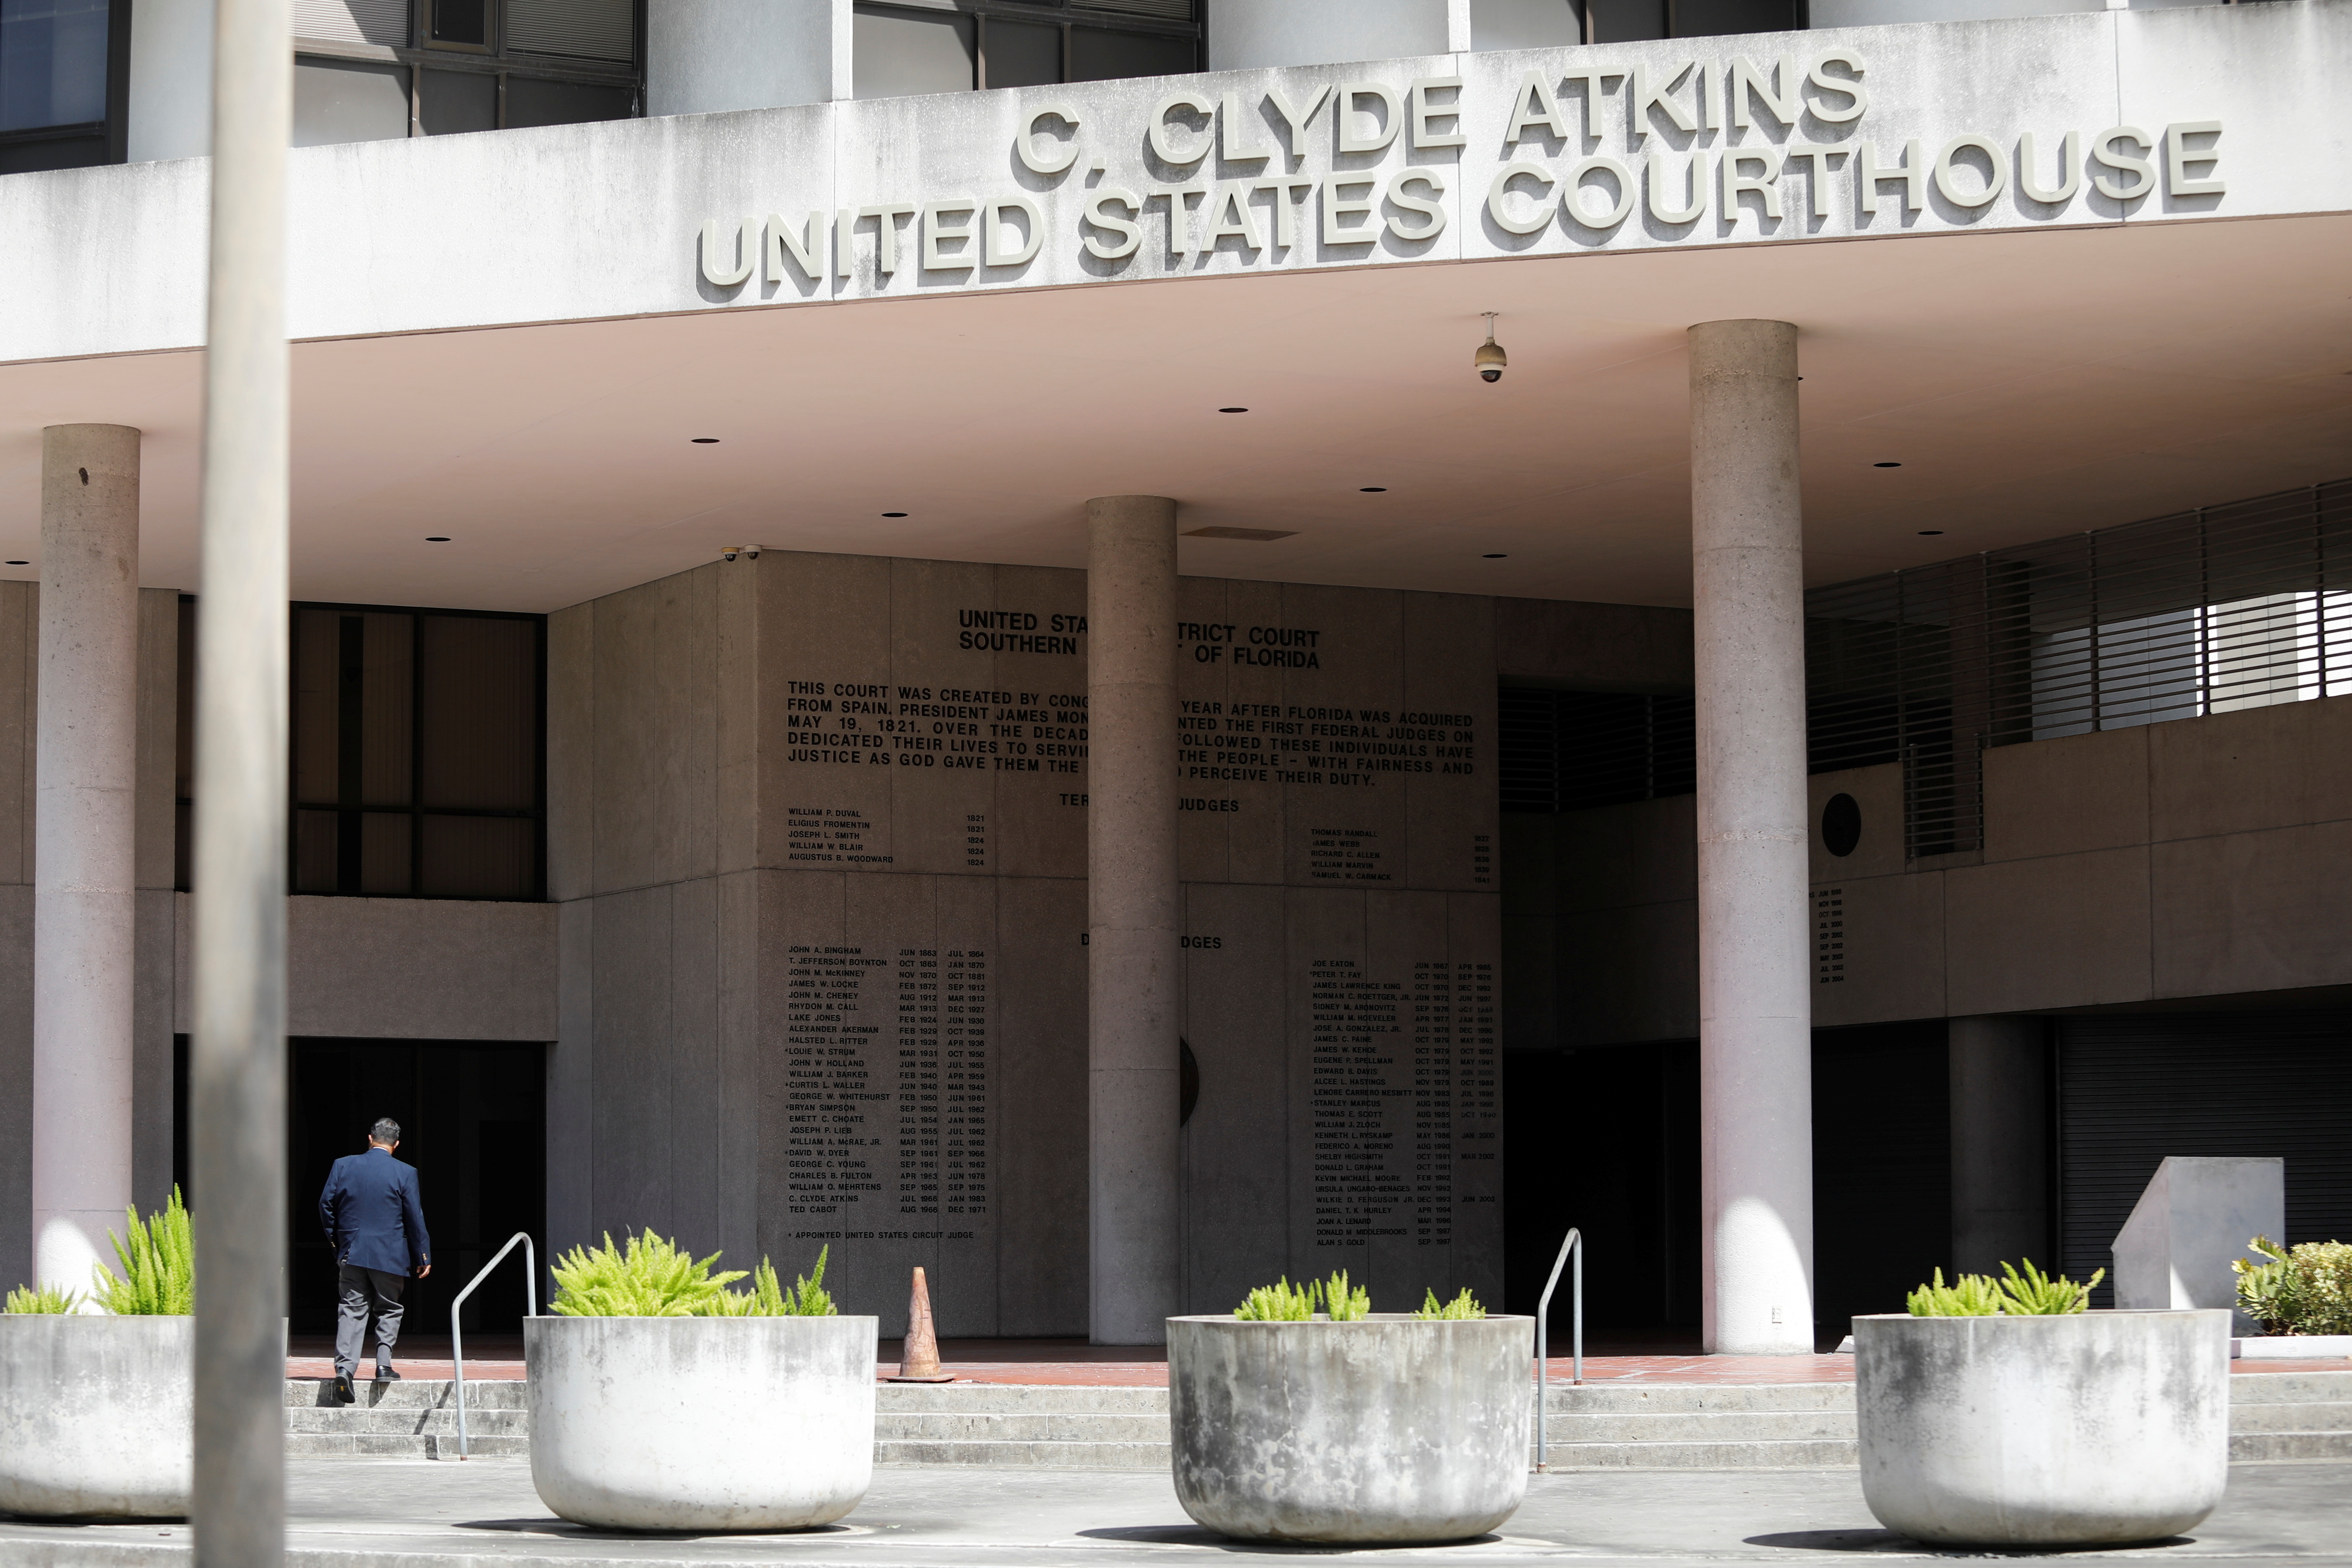 A man walks in C. Clyde Atkins U.S. Courthouse where Alex Saab, a businessman accused of laundering money on behalf of Venezuela's government, will be arraigned in Florida federal court in Downtown Miami, Florida, U.S., October 18, 2021. REUTERS/Marco Bello